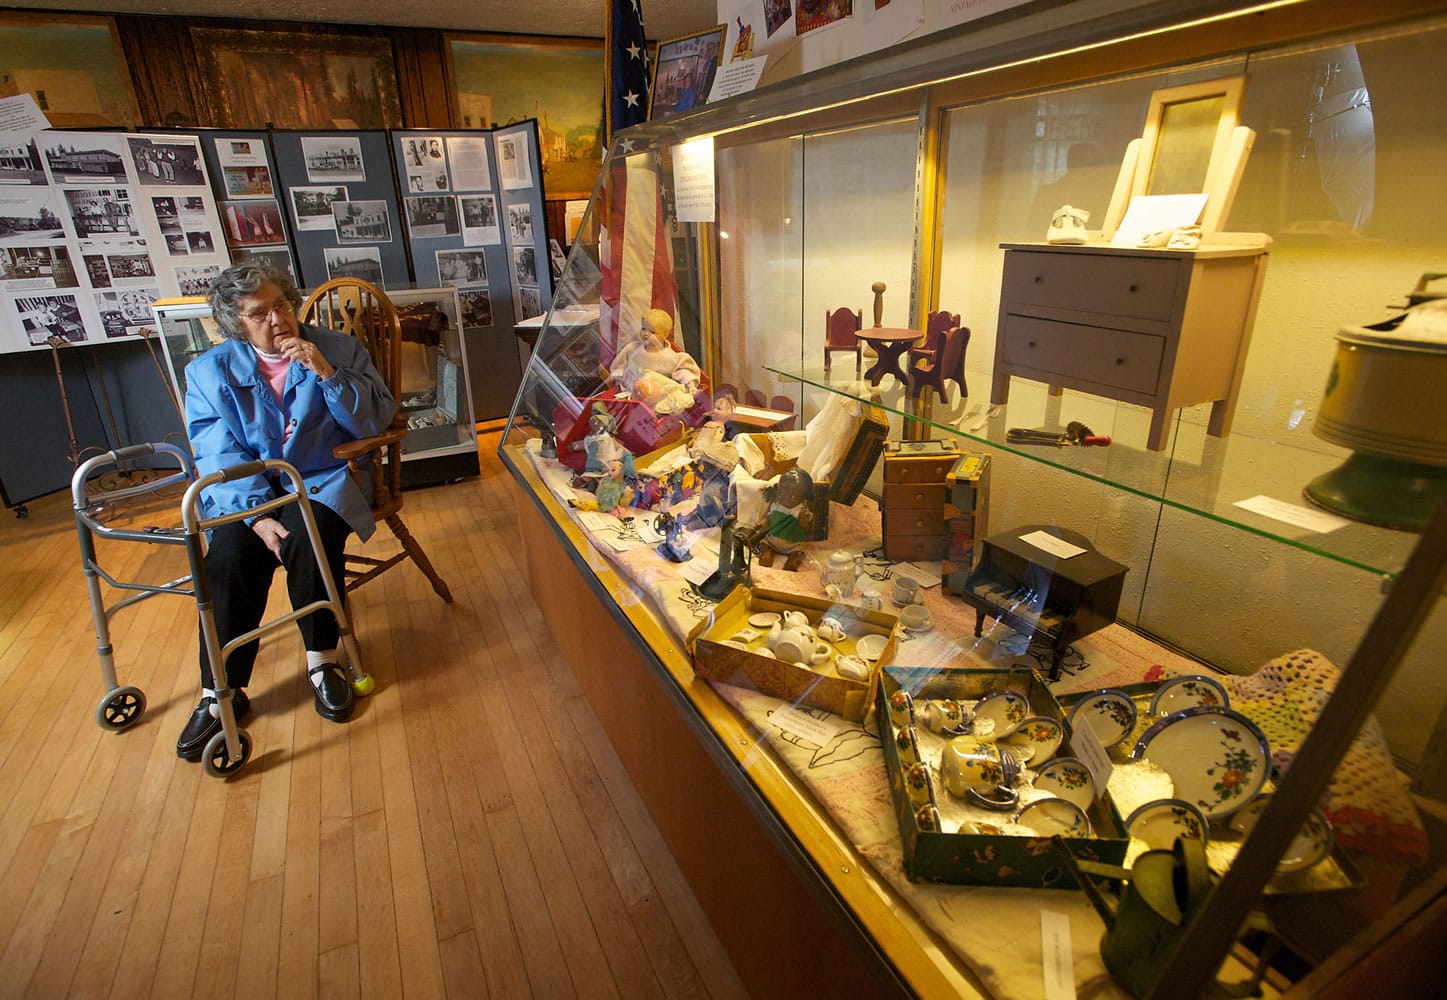 Delora Green McMenomy moved back to La Center after an adult lifetime in California, and donated much of her collection of antique toys and dolls to the La Center Historical Museum.